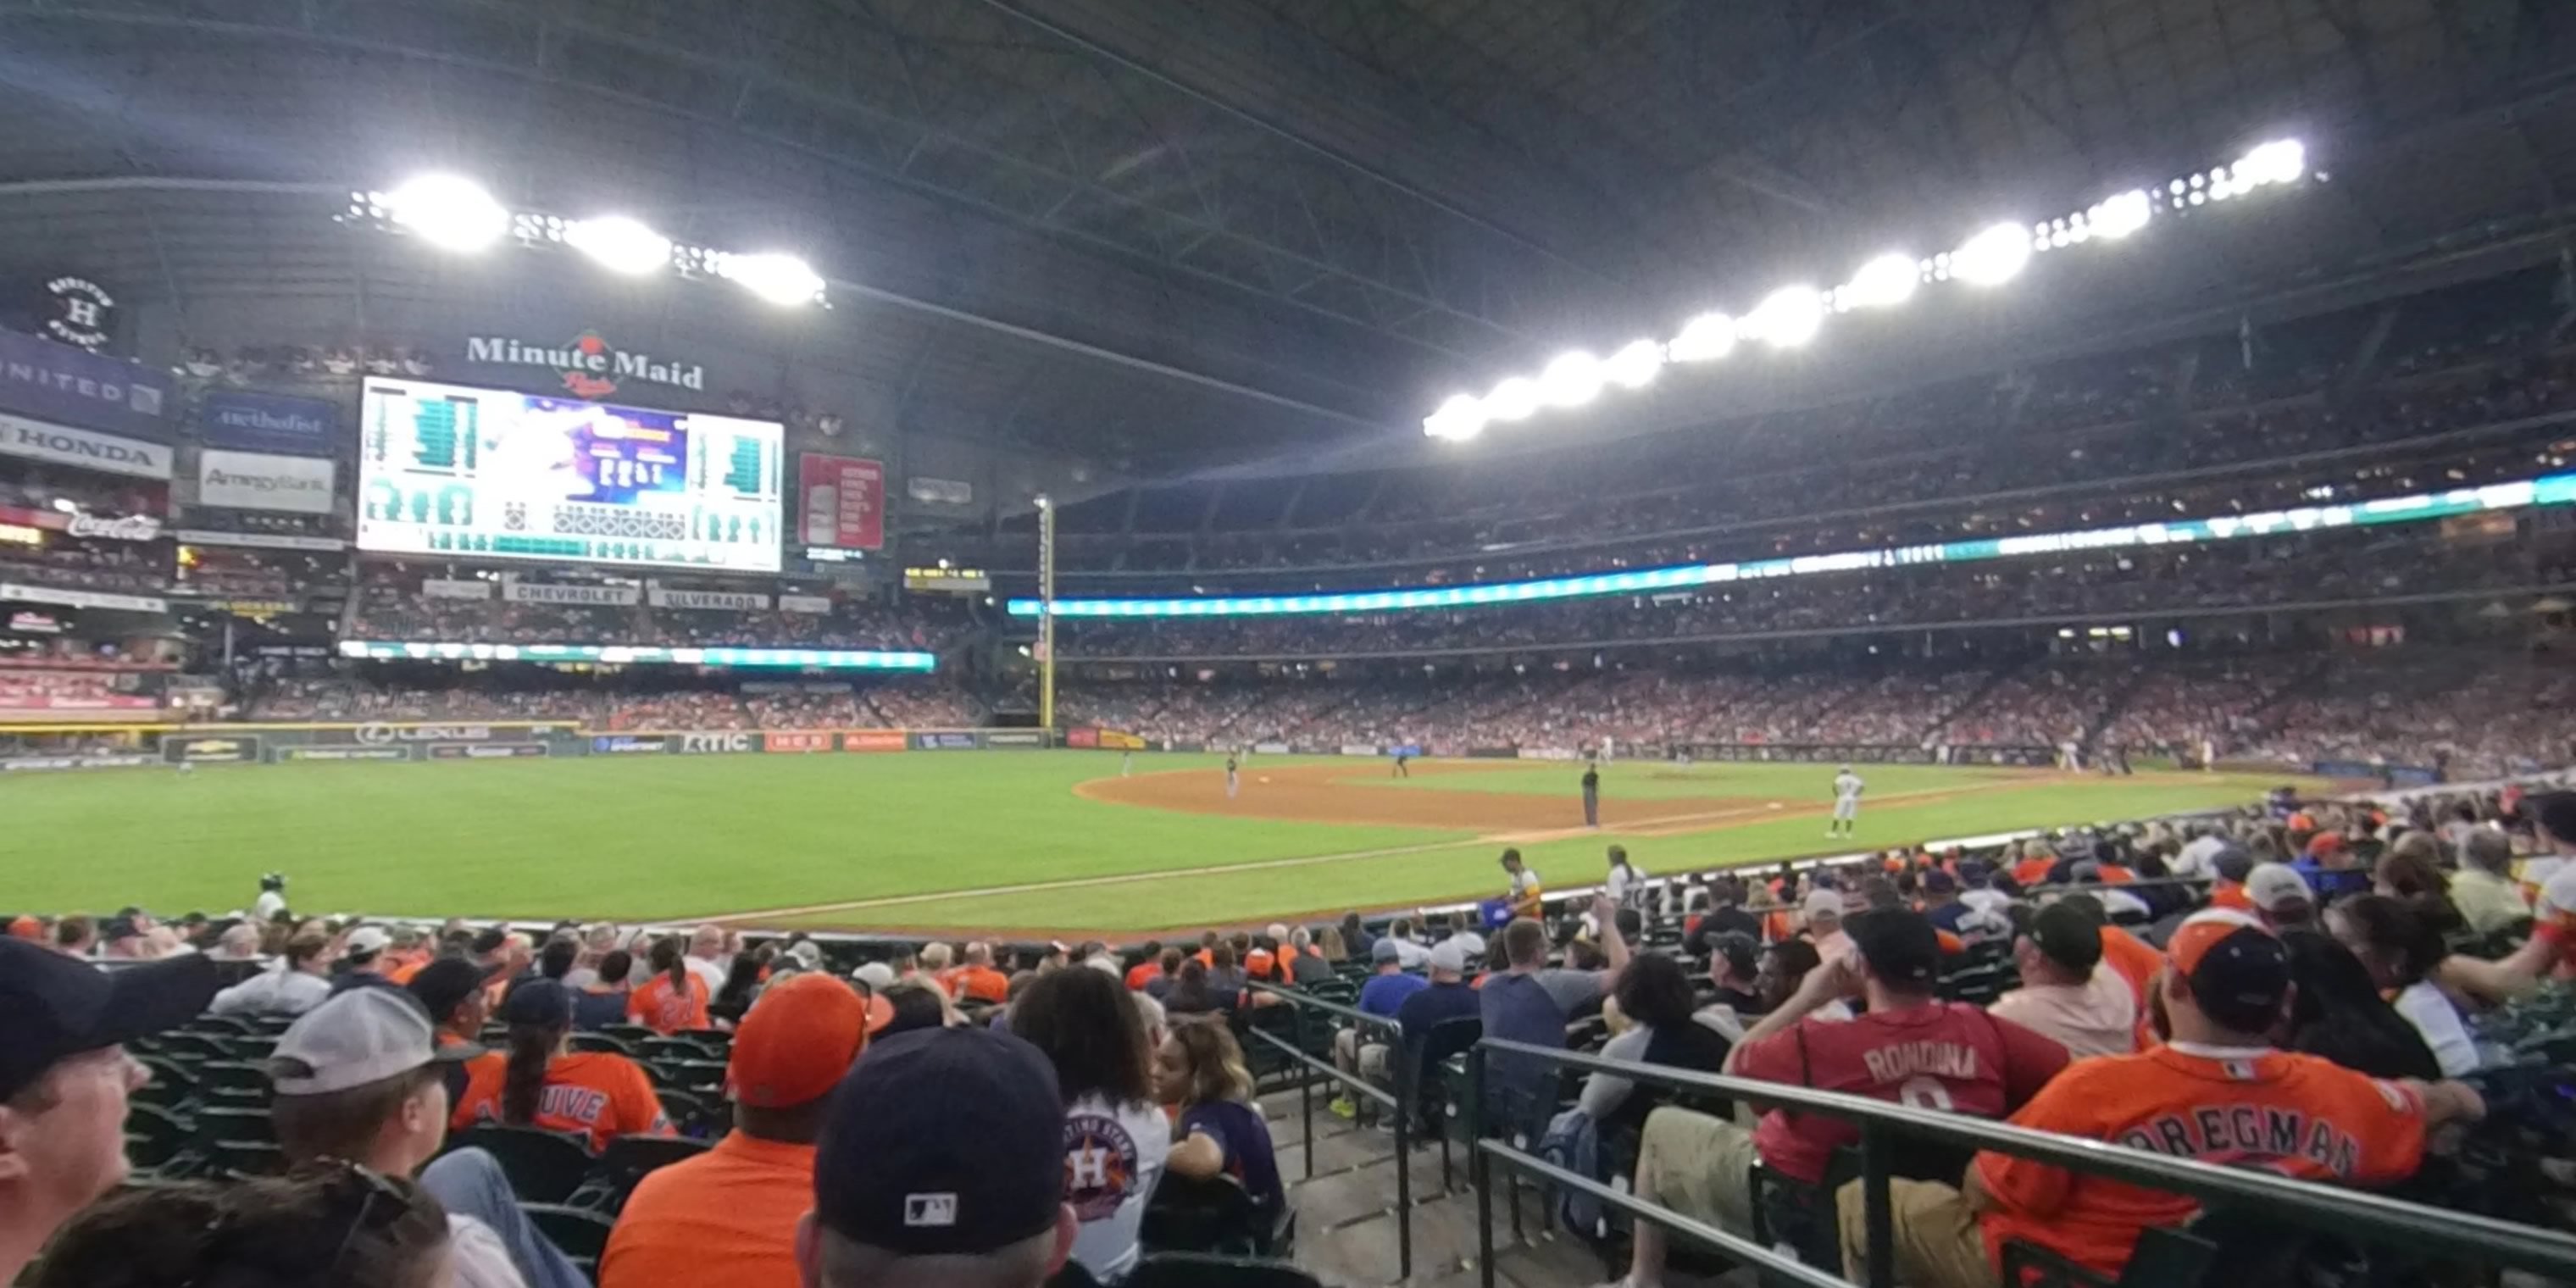 Section 108 At Minute Maid Park